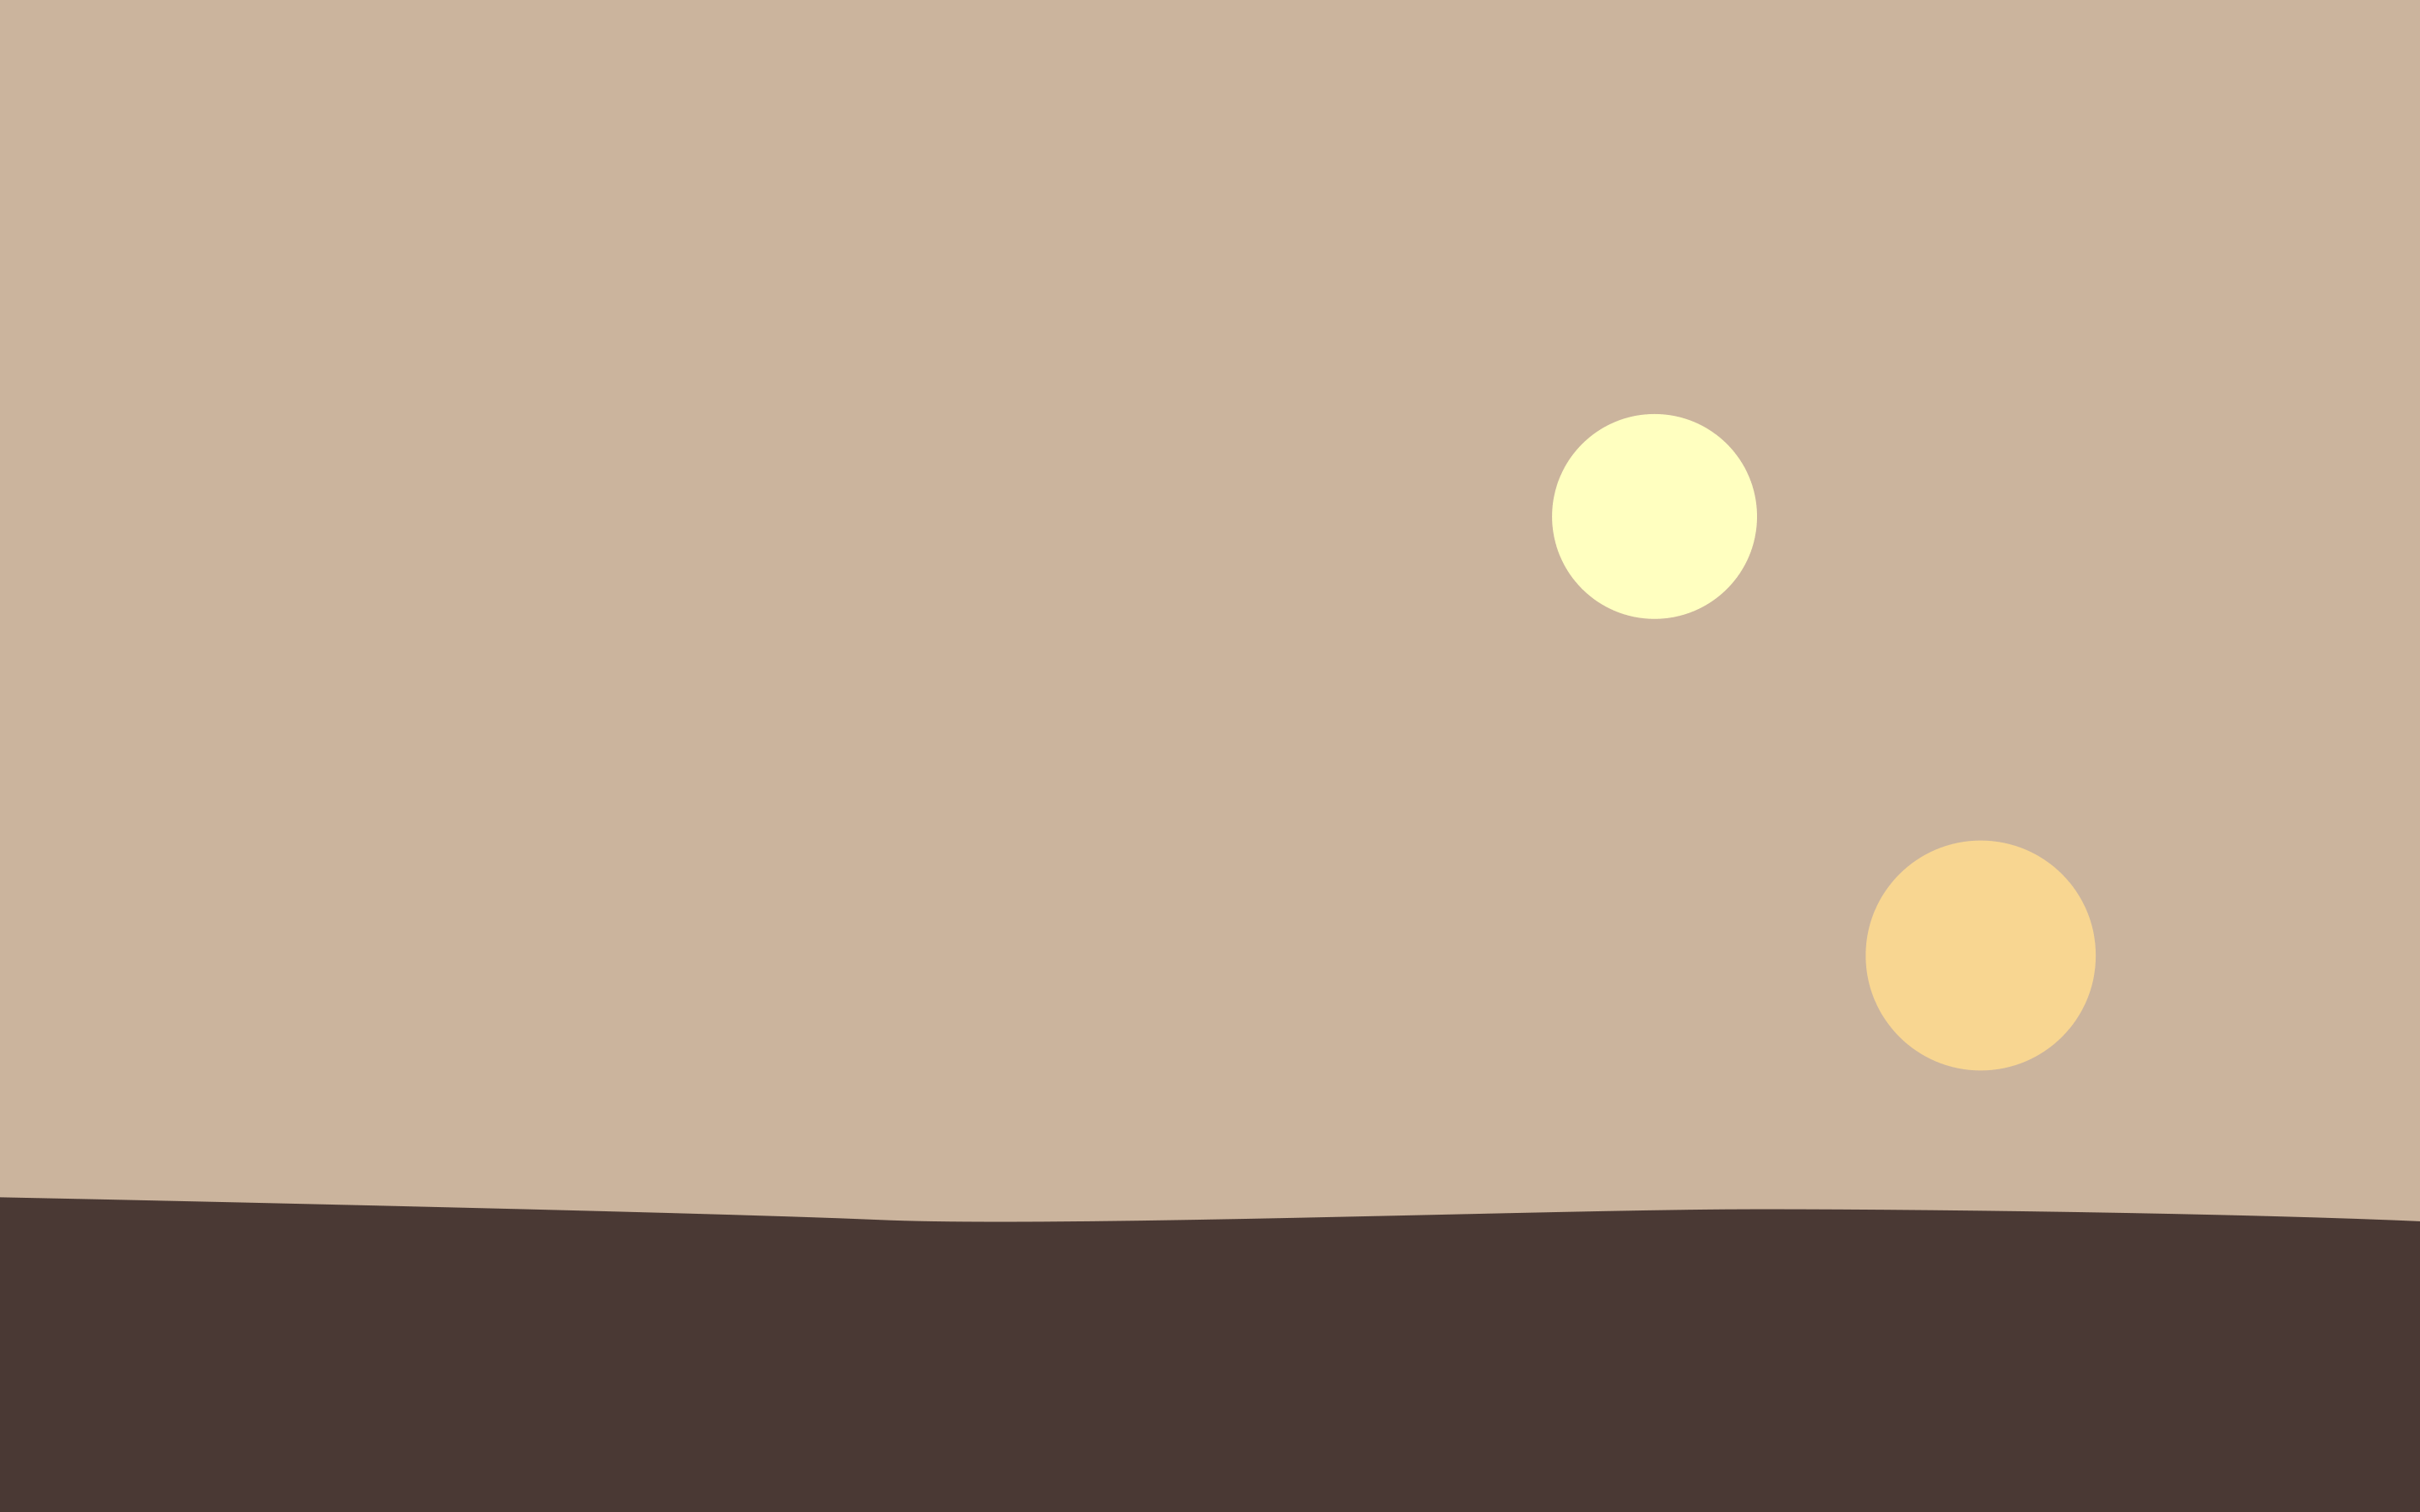 A desert landscape with two yellow moons on the horizon - Minimalist